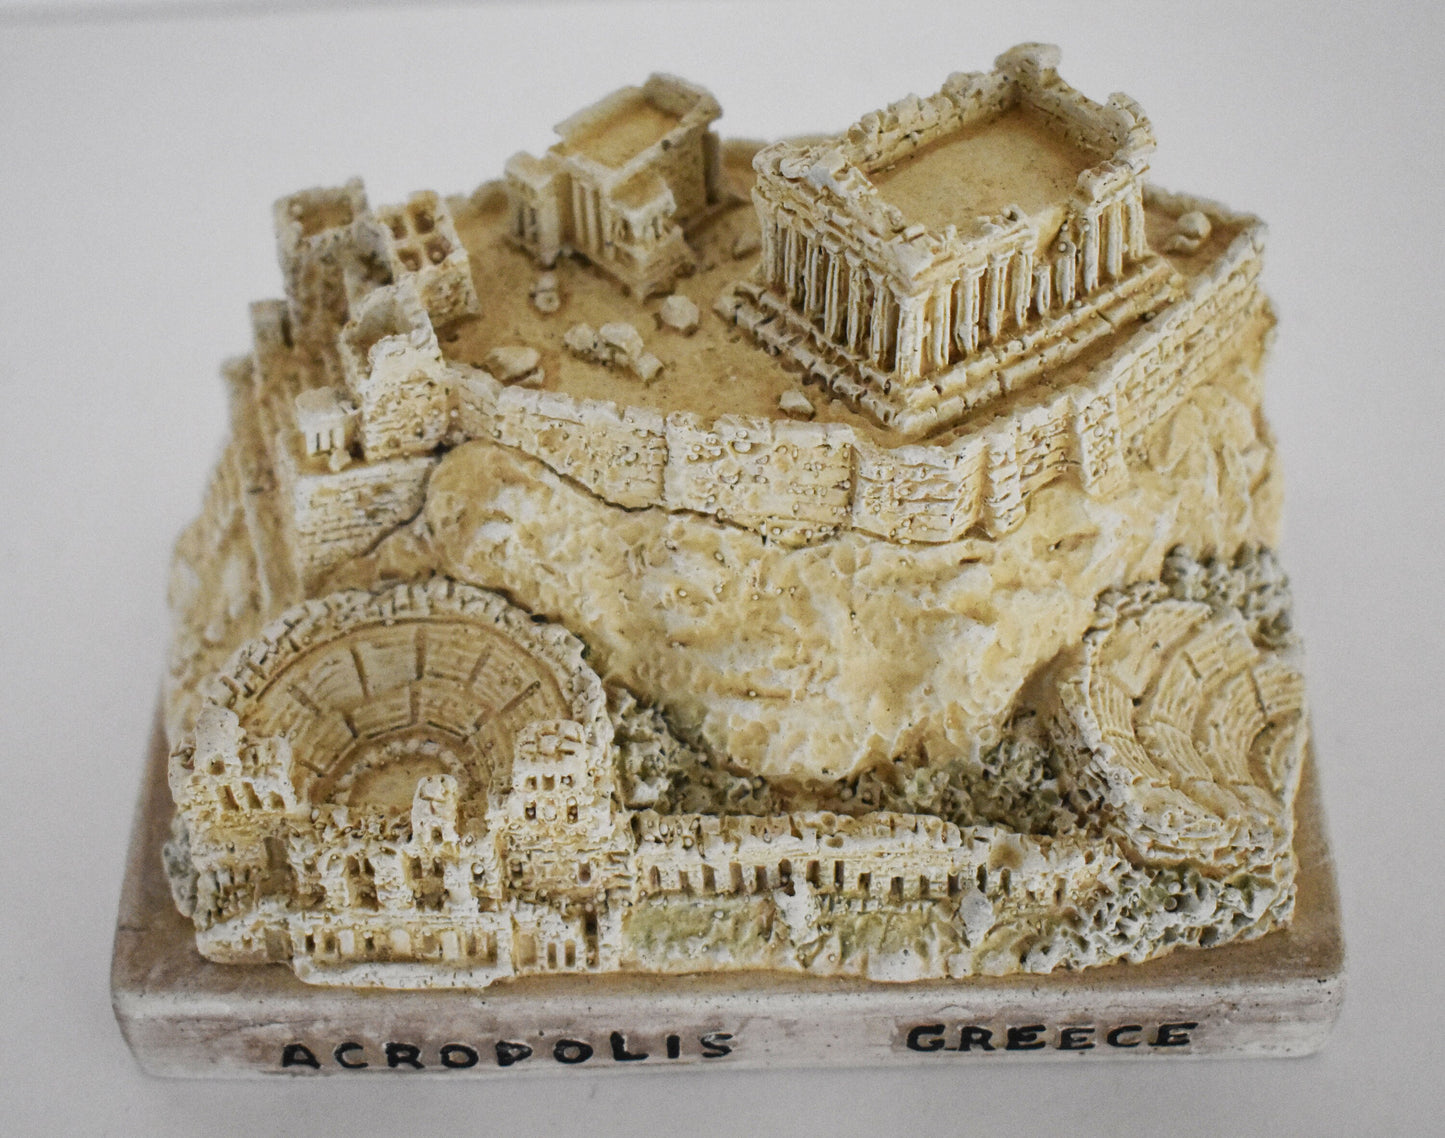 Acropolis of Athens - Defensively District Containing the Chief Municipal and Religious Buildings - Handmade - Casting Stone Statue